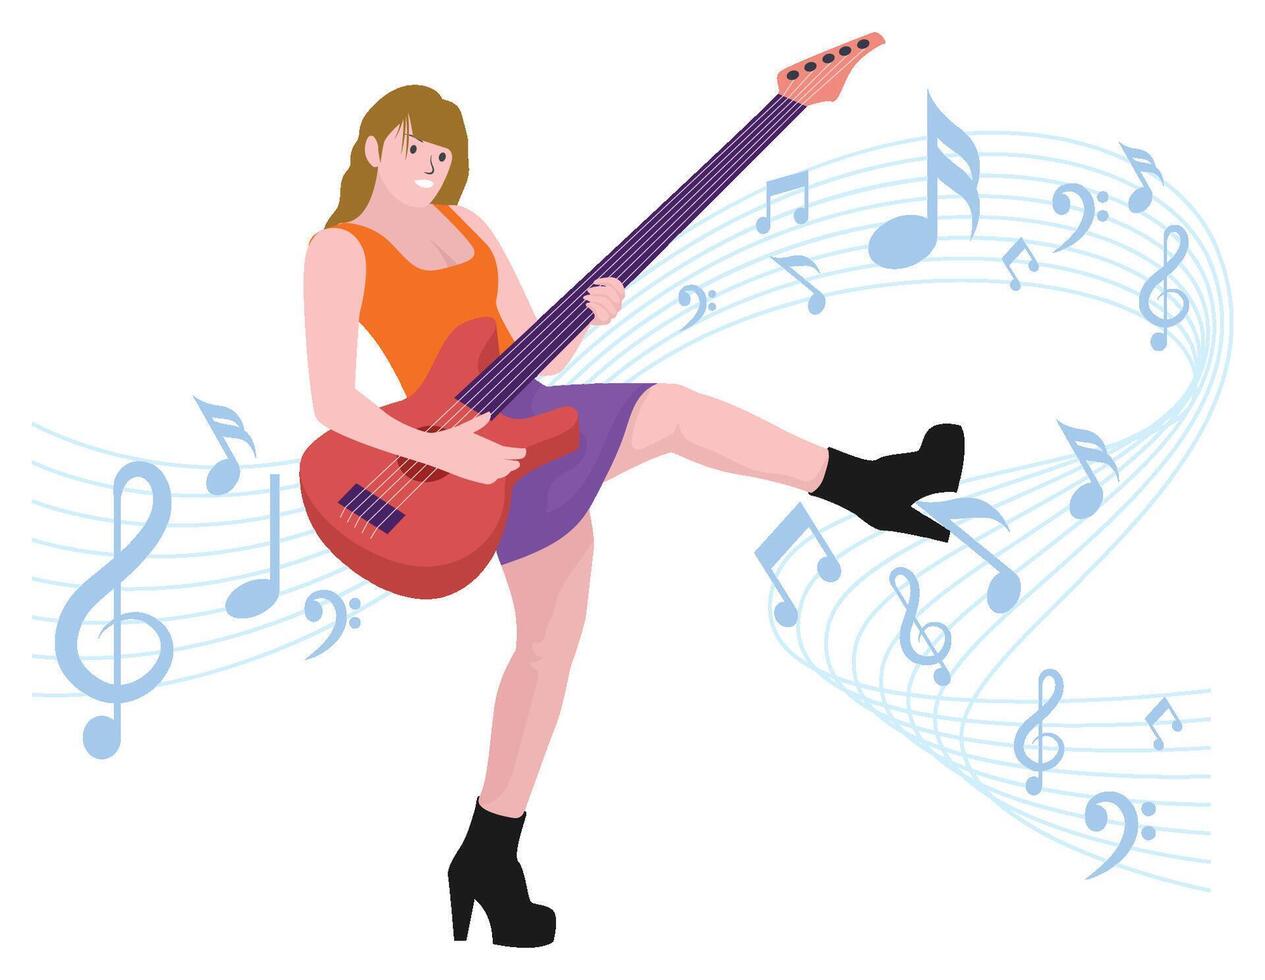 Girl playing electric guitar - Musical rock band illustration vector